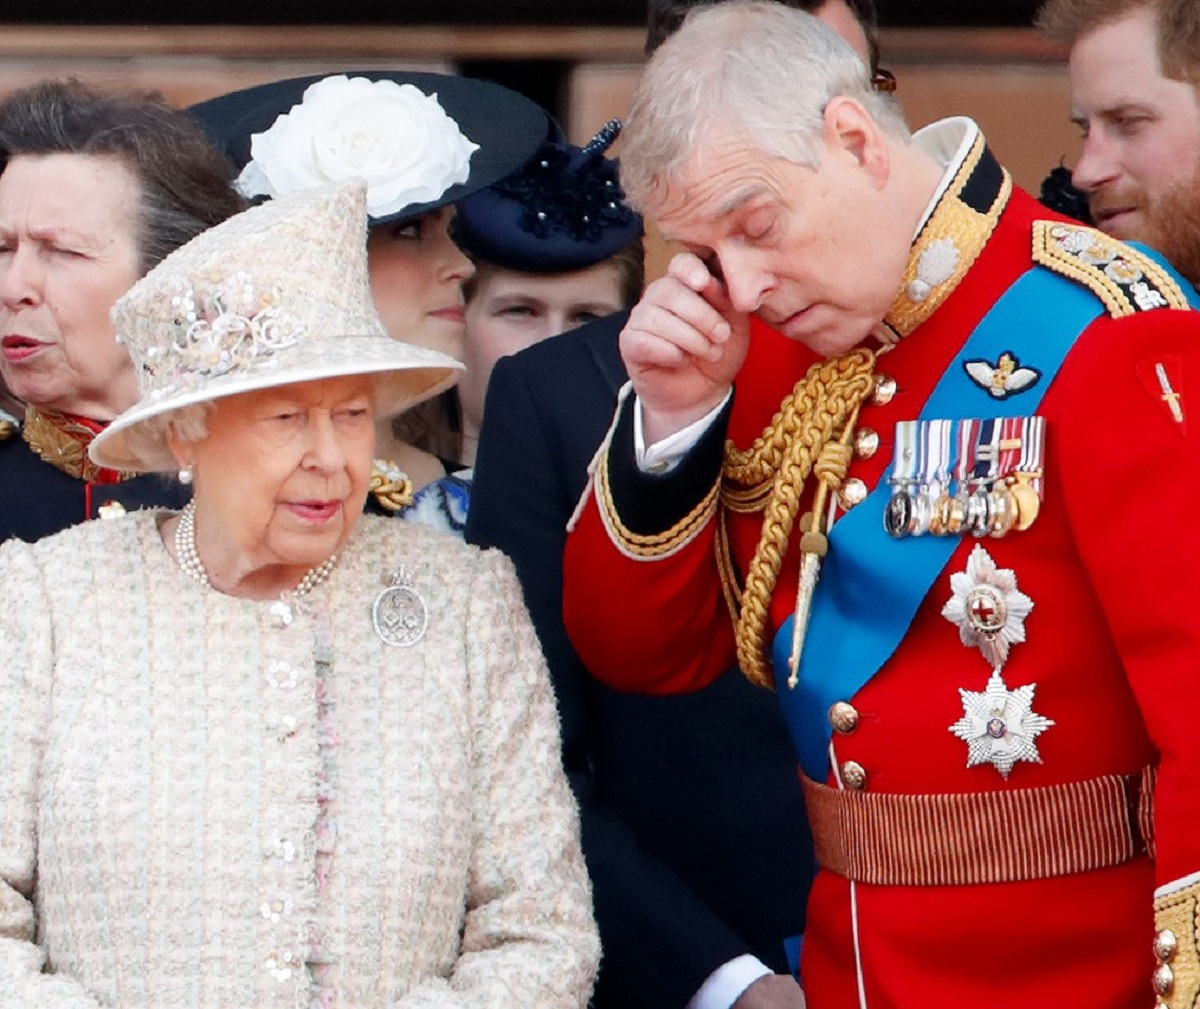 Prince Andrew, who is reportedly seeking Queen Elizabeth II's help about his future, rubbing his eye as he stands next to her on the Buckingham Palace balcony 